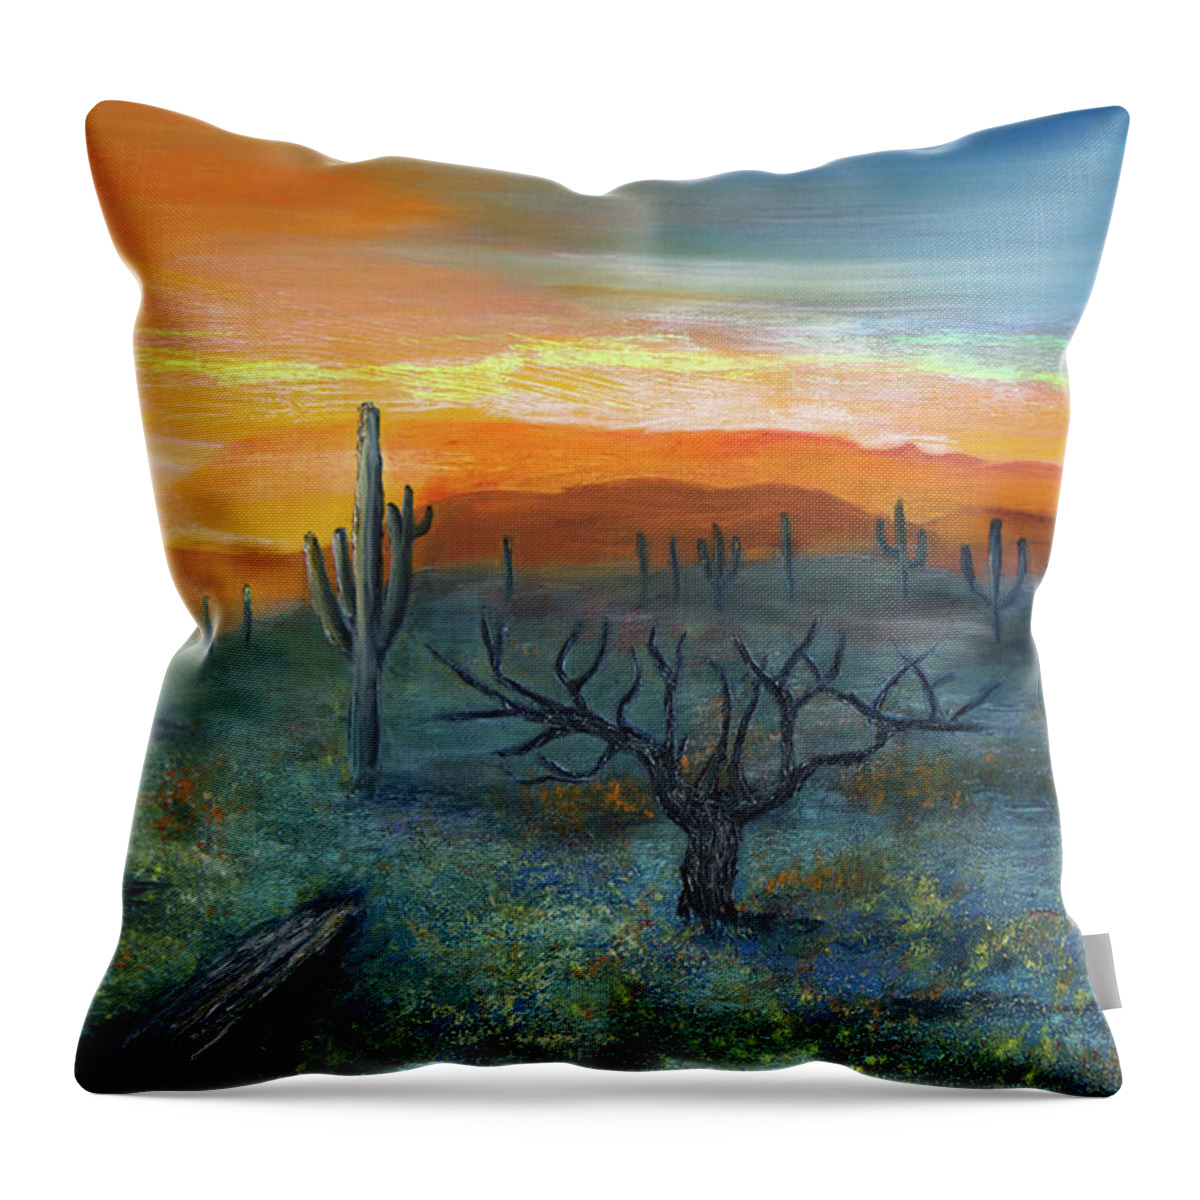 Orange Throw Pillow featuring the painting Morning Has Broken by Evelyn Snyder